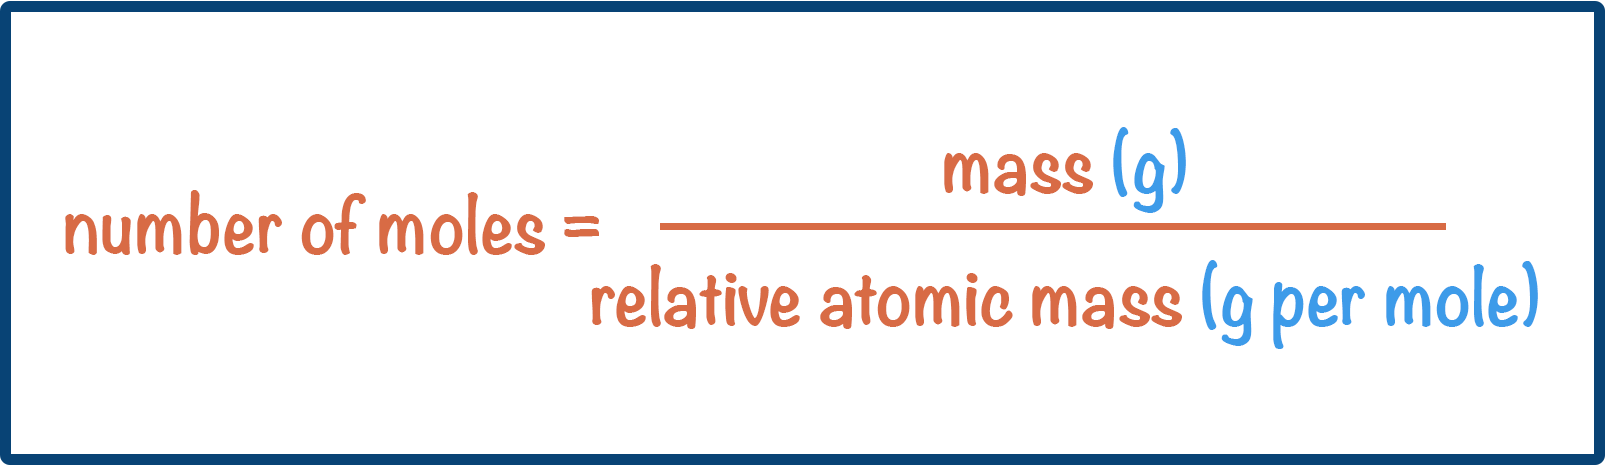 equation for calculating moles from mass and relative atomic mass